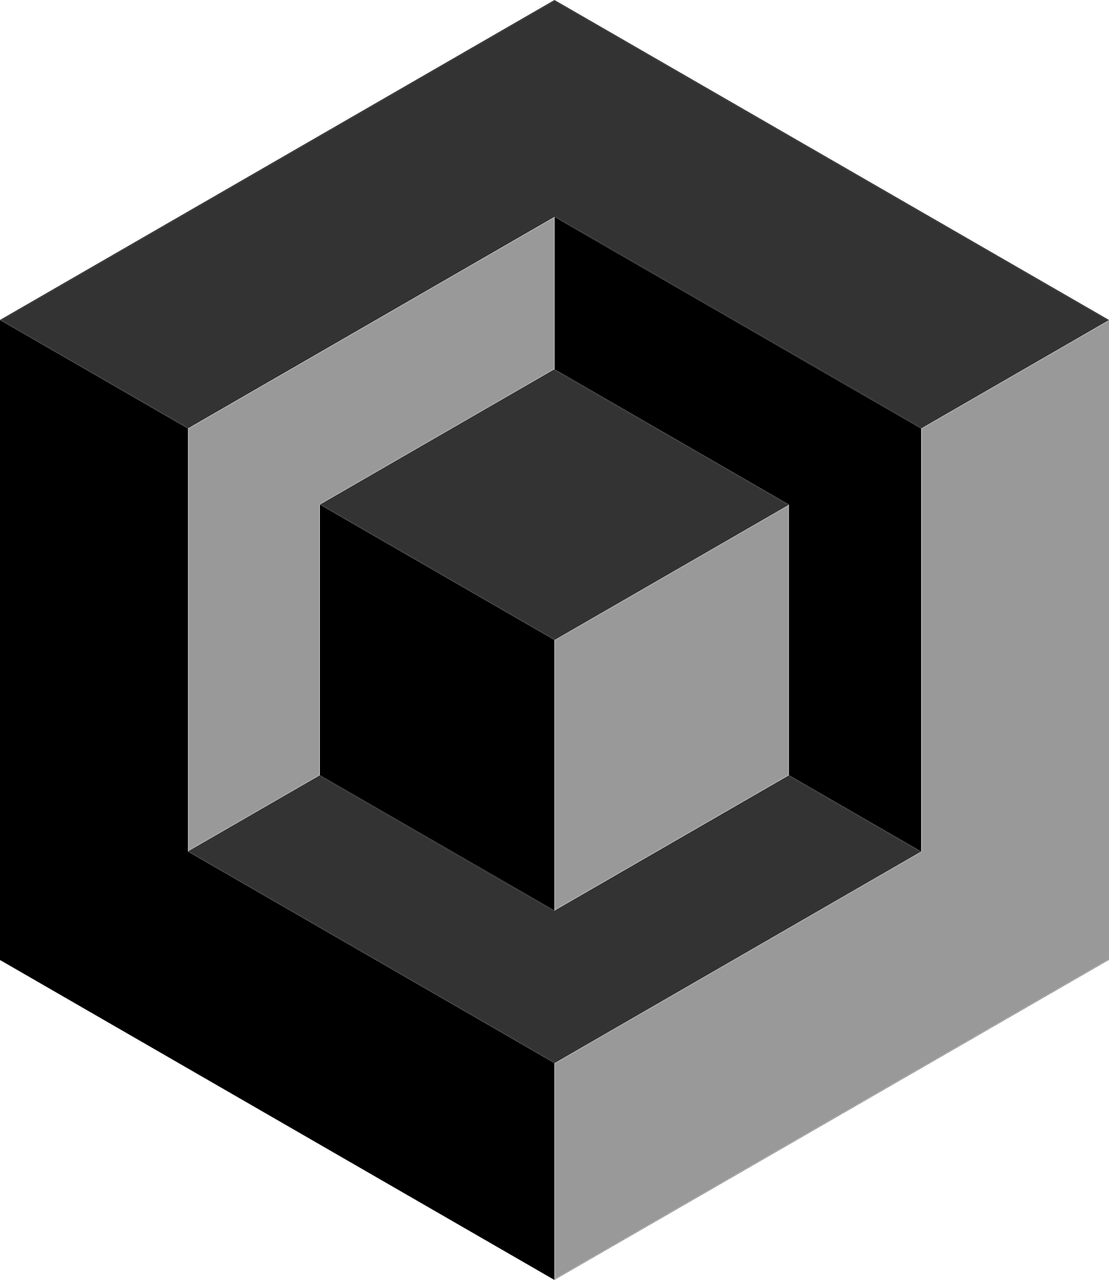 a black and white image of a cube, a computer rendering, inspired by Josef Block, deviantart, giant crypto vault, angular design, black and grey, inverse color